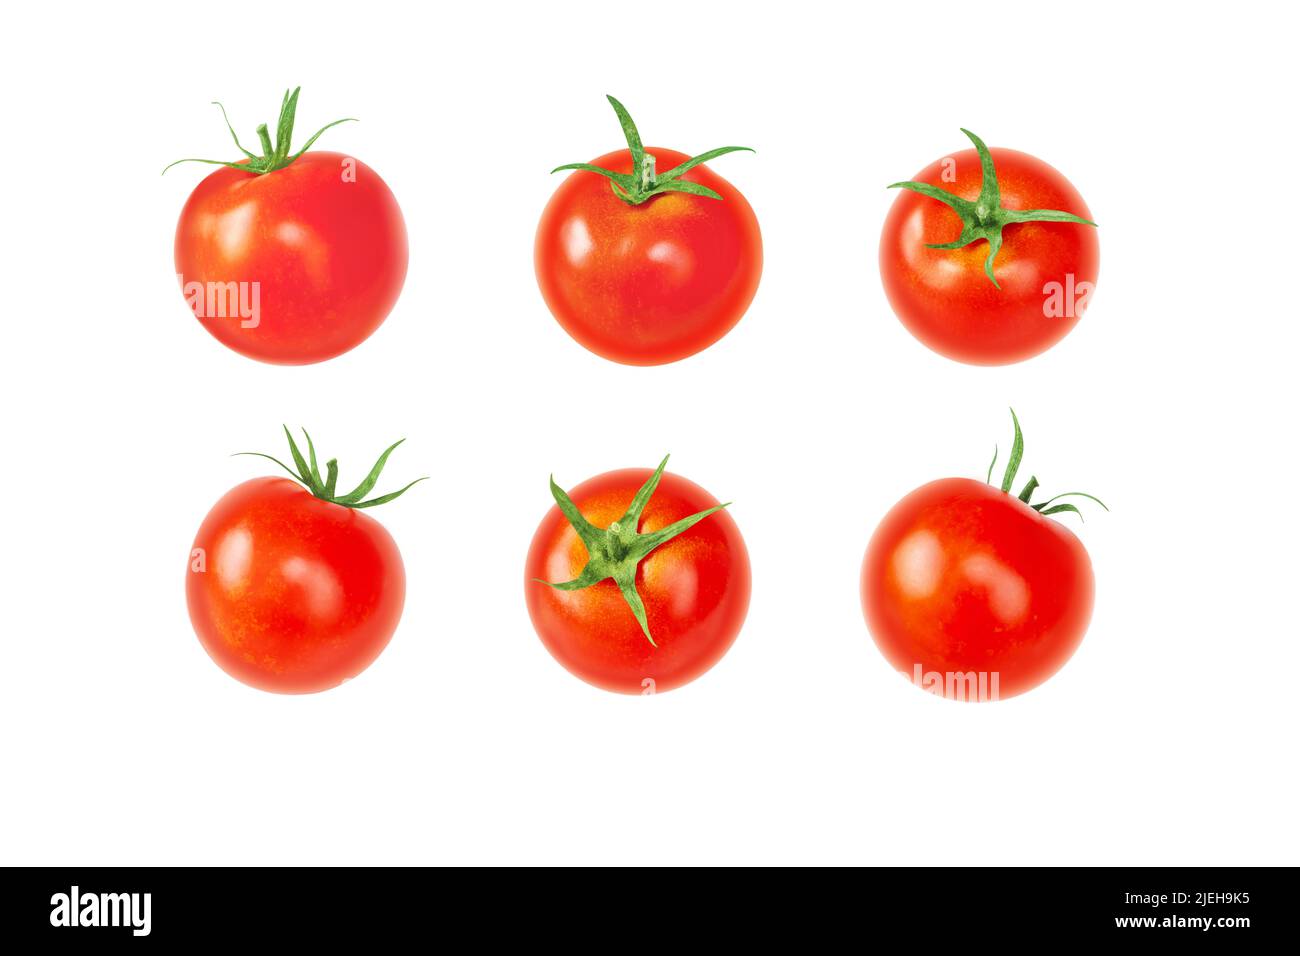 Tomato red vegetable set isolated on white. Solanum lycopersicum ripe fruits in different positions. Stock Photo